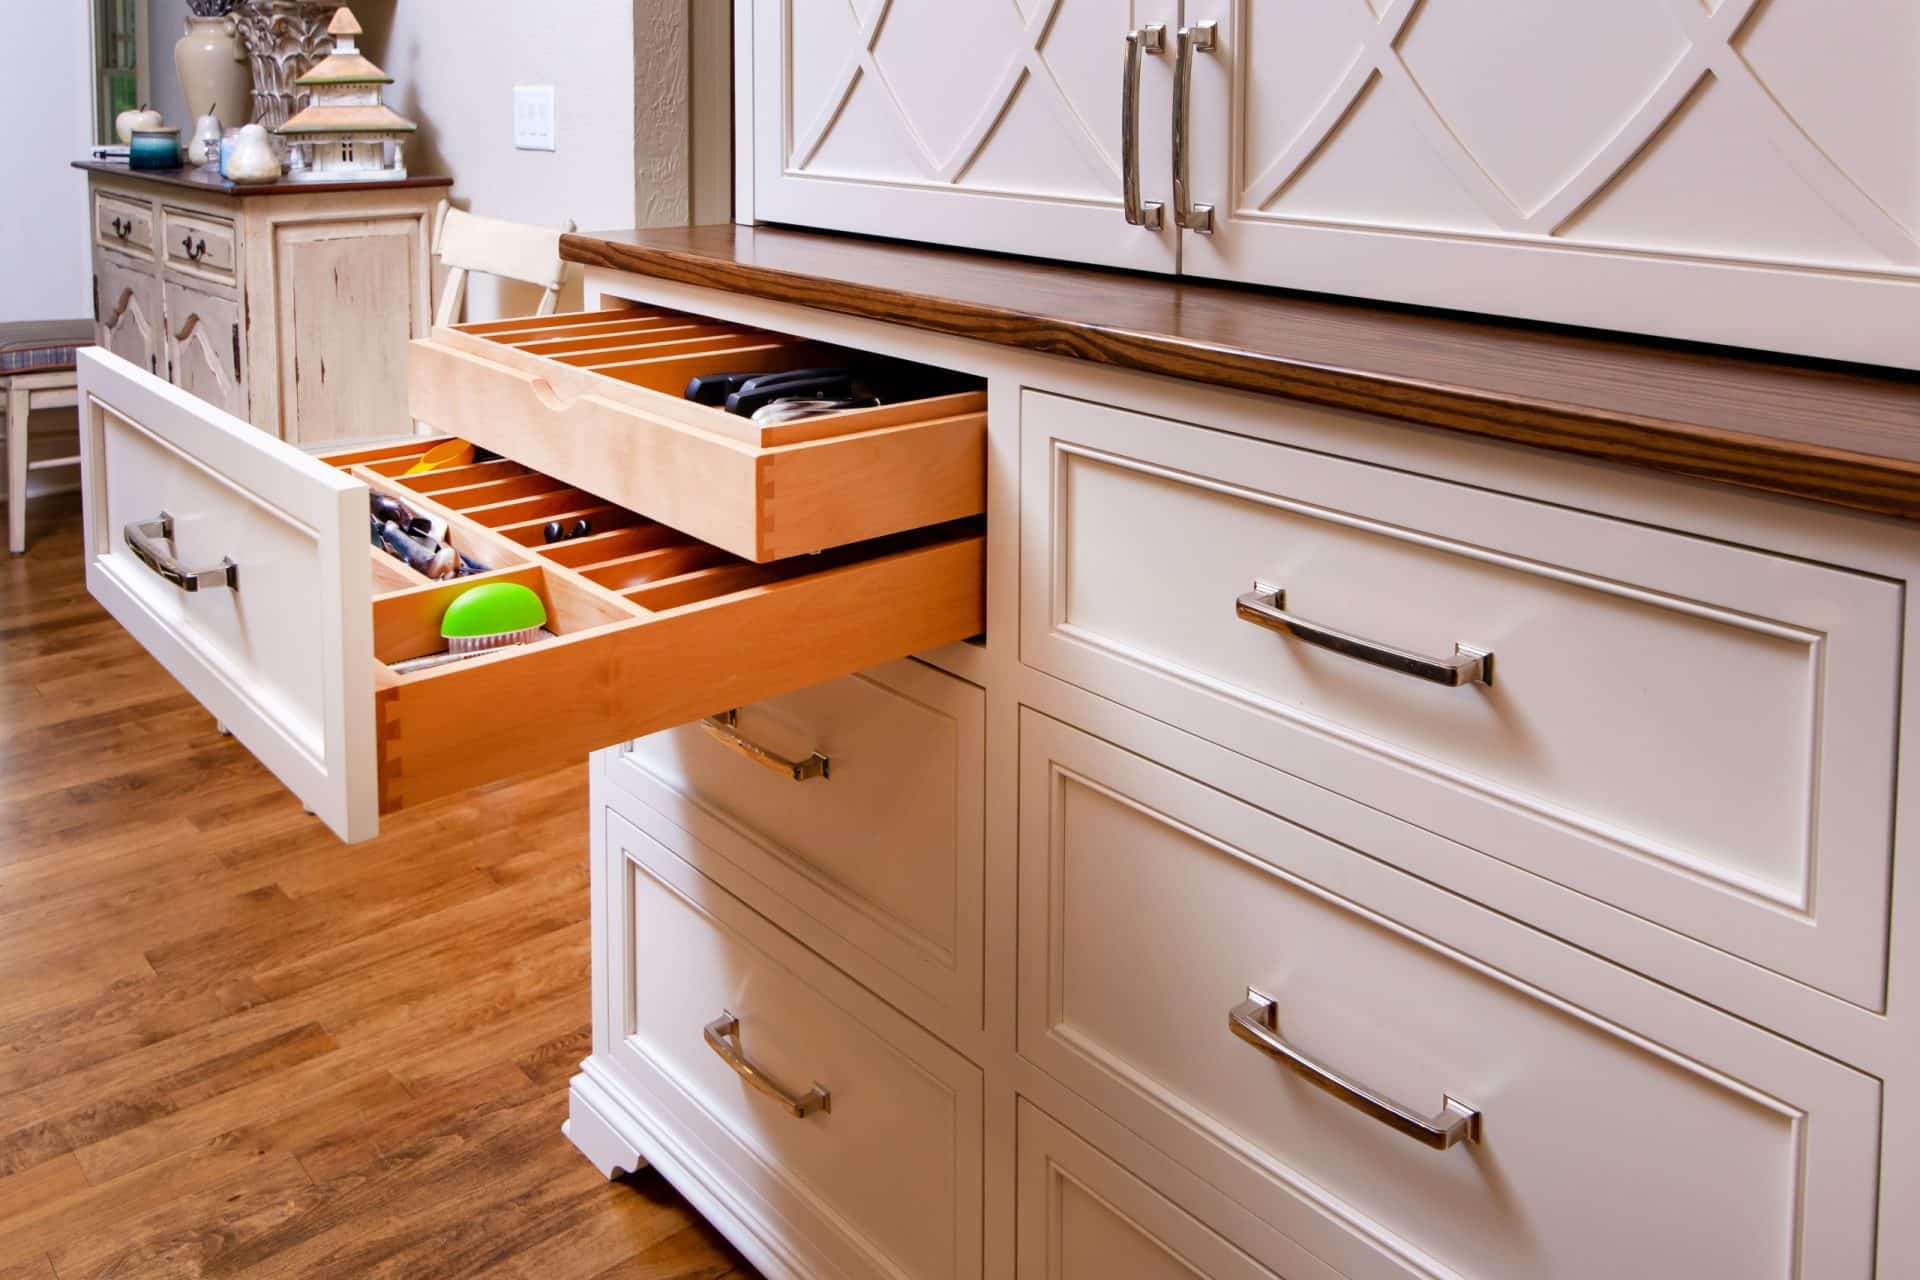 Is No Hardware the New Hardware Trend for Kitchens?